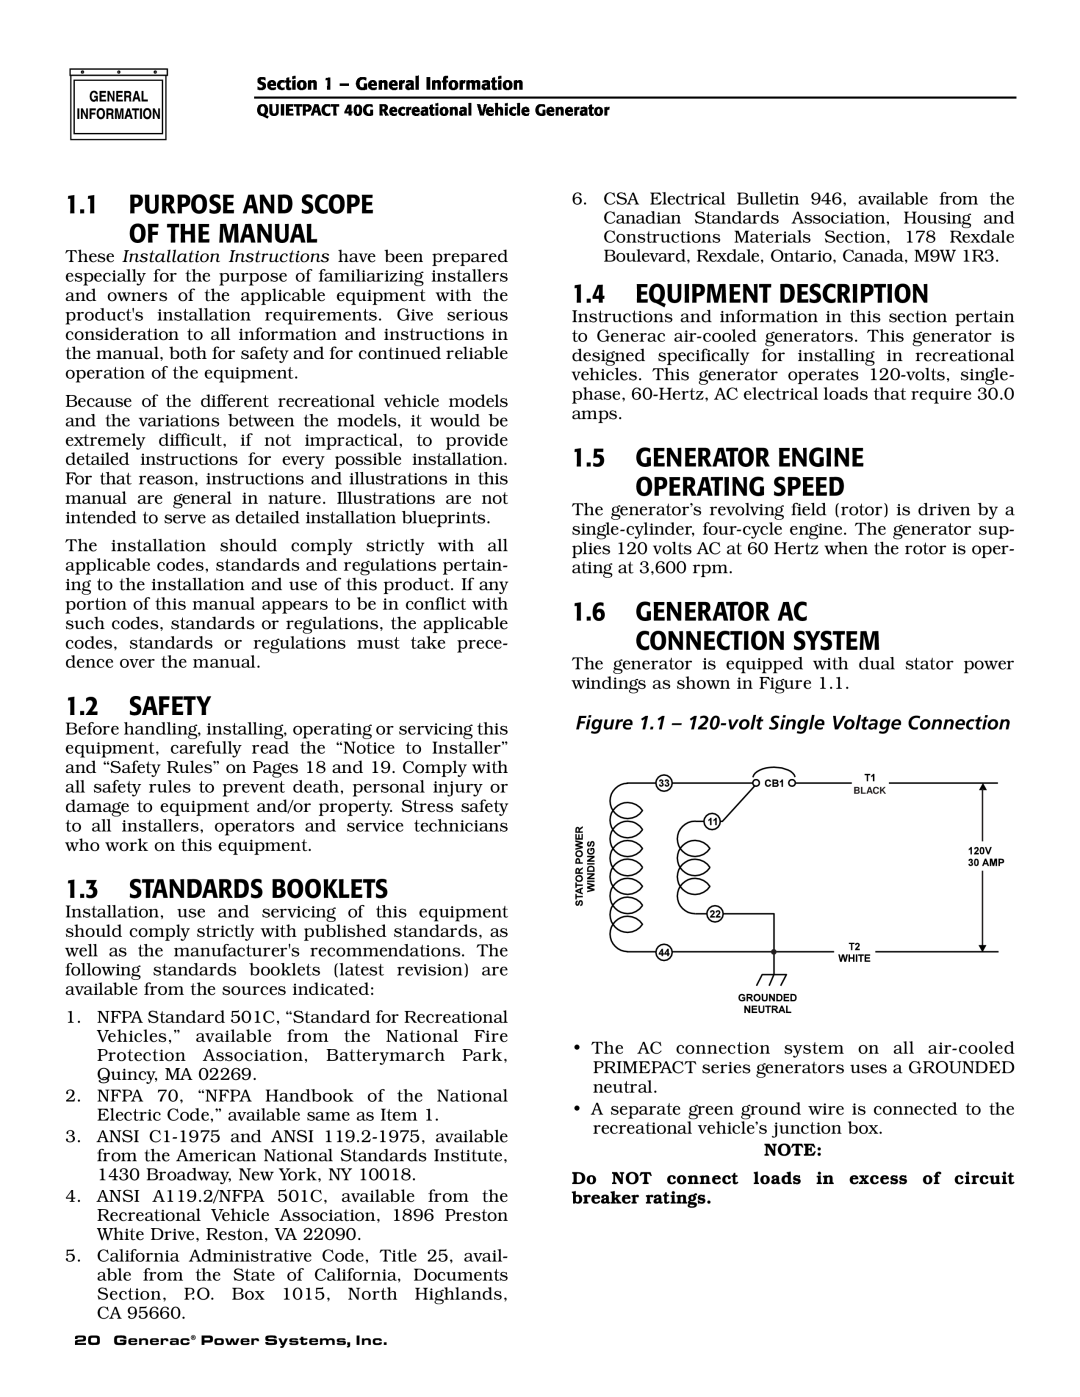 Generac 004700-0 Purpose And Scope Of The Manual, Equipment Description, Generator Engine Operating Speed, Safety 